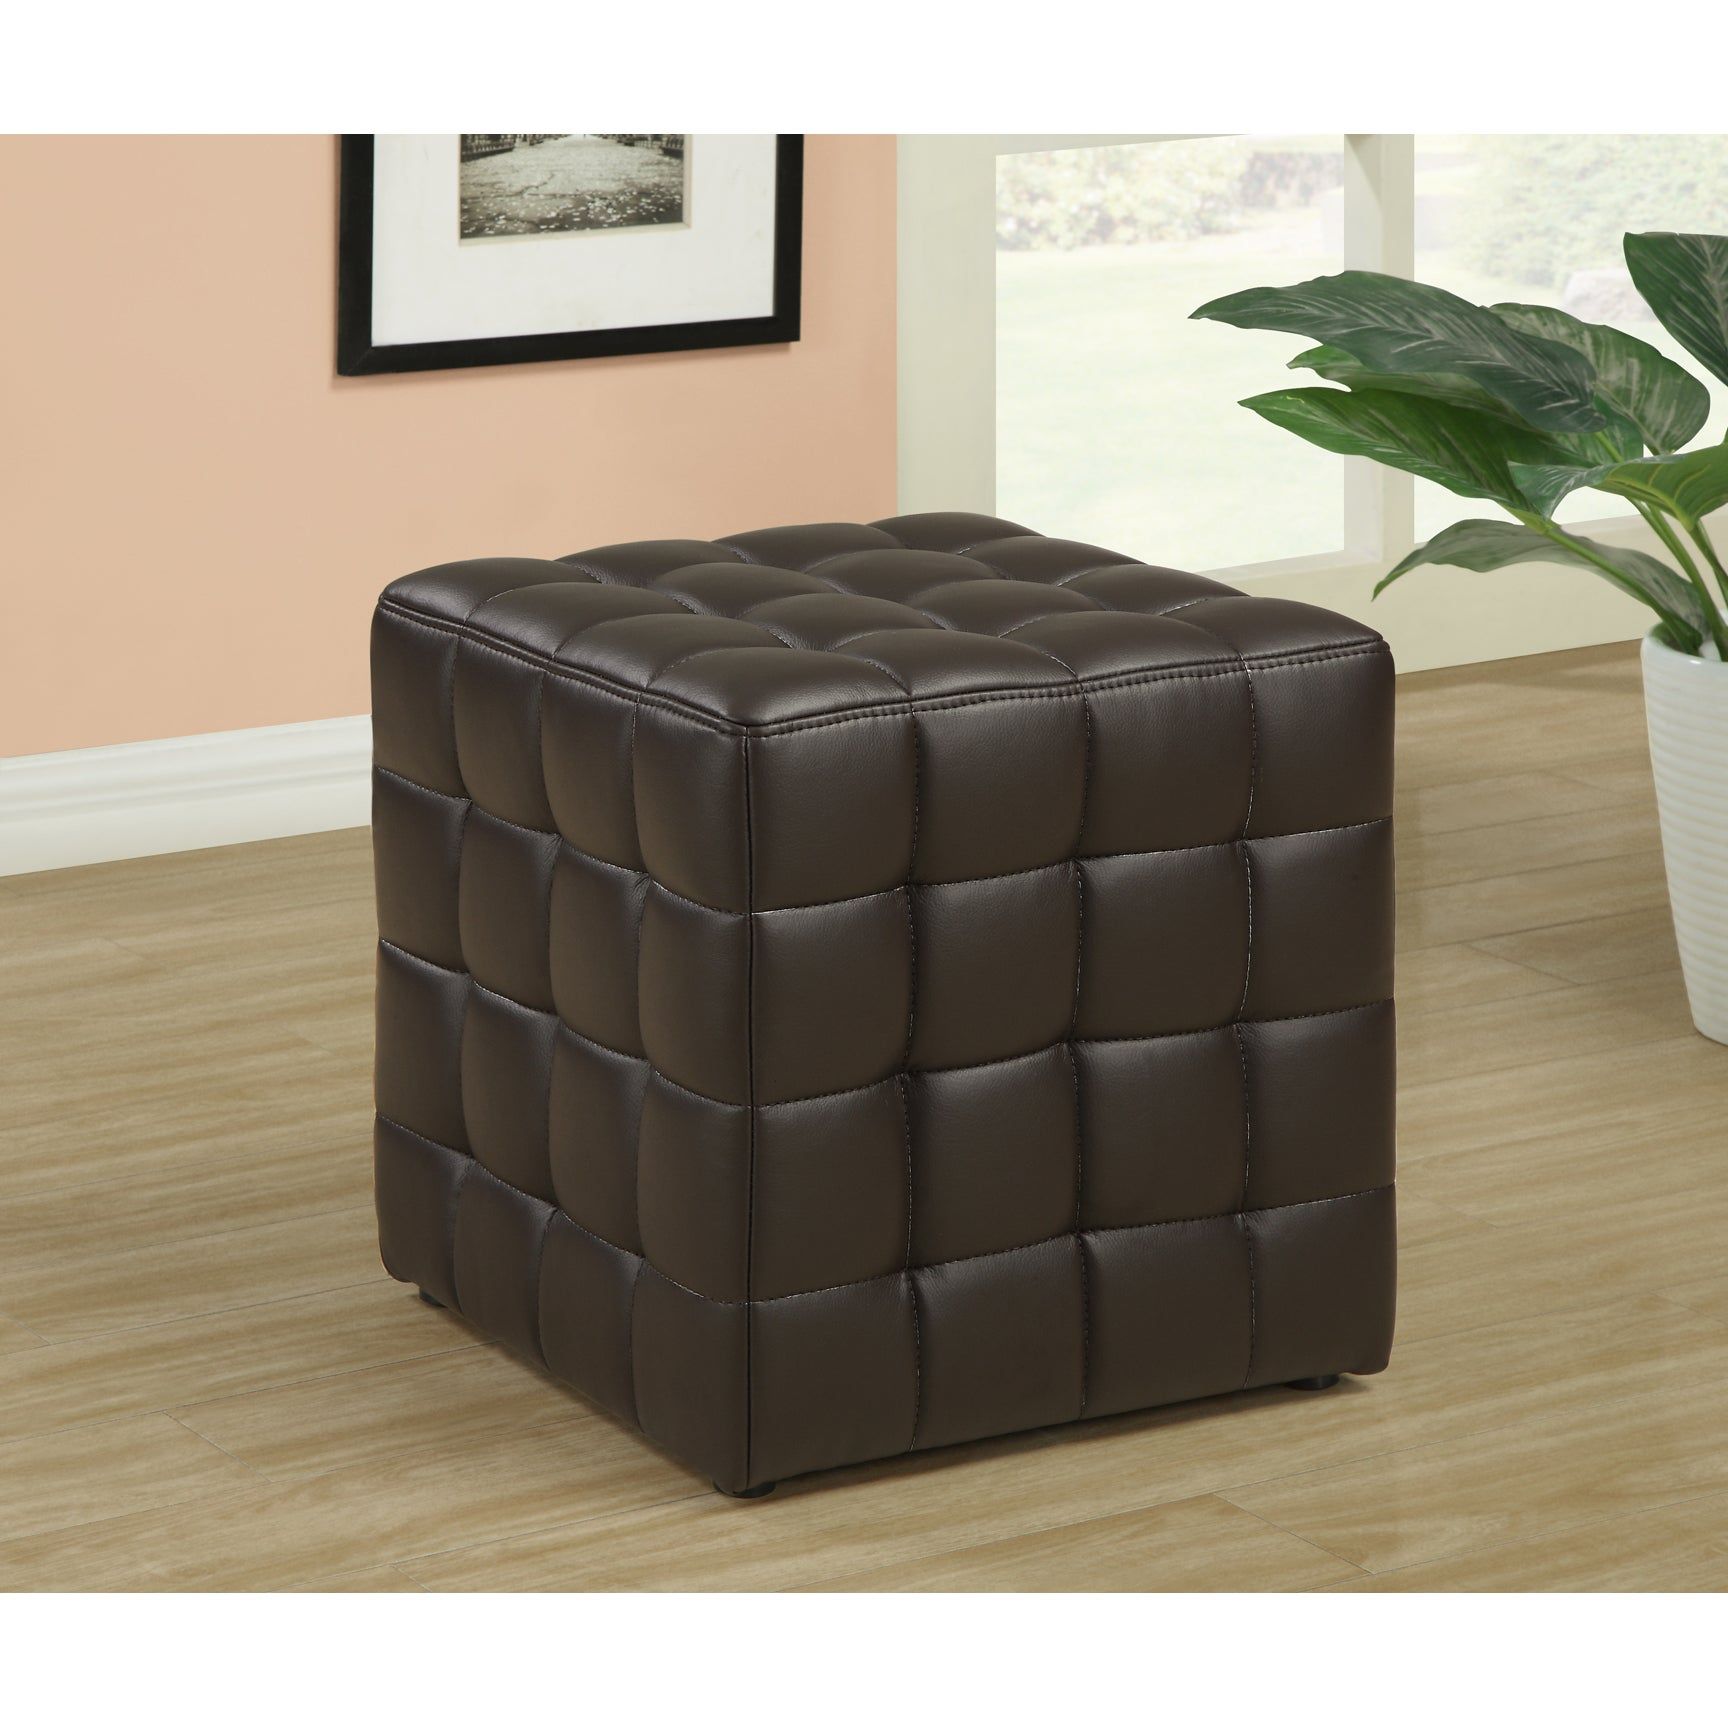 Dark Brown Leather Look Ottoman – Free Shipping Today – Overstock In Black White Leather Pouf Ottomans (View 1 of 20)